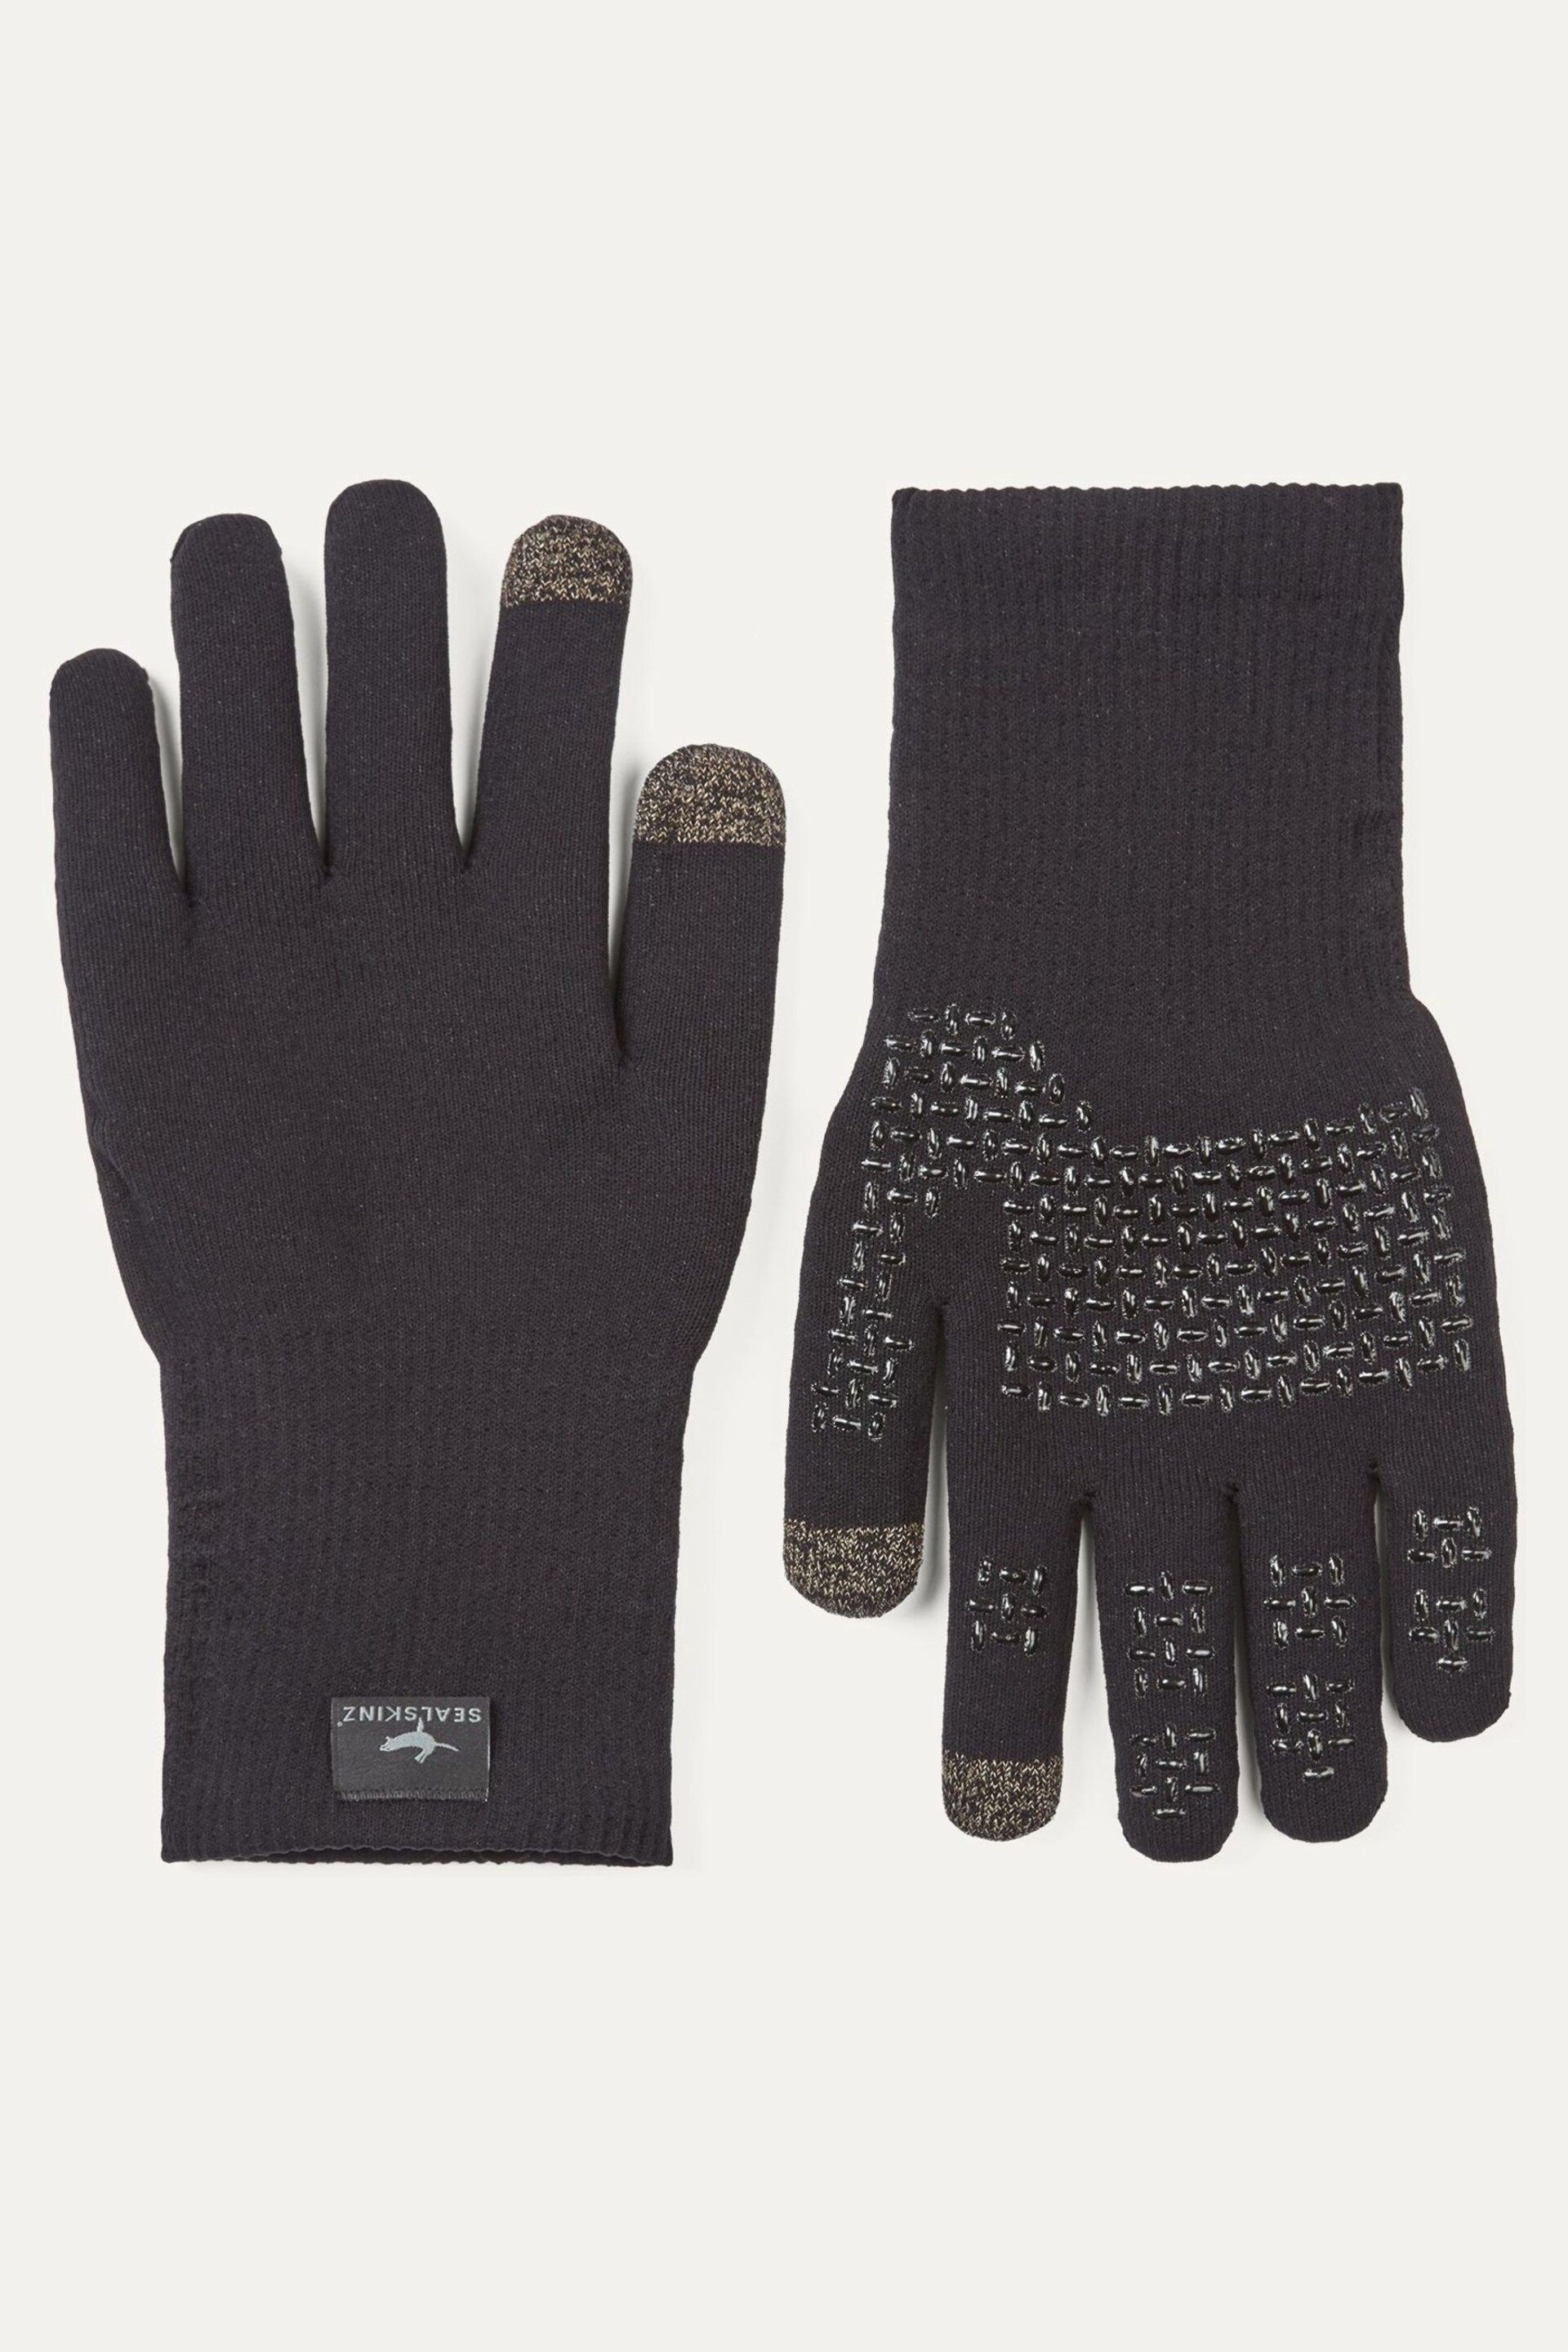 Sealskinz Anmer Waterproof All Weather Ultra Grip Knitted Gloves - Image 1 of 2